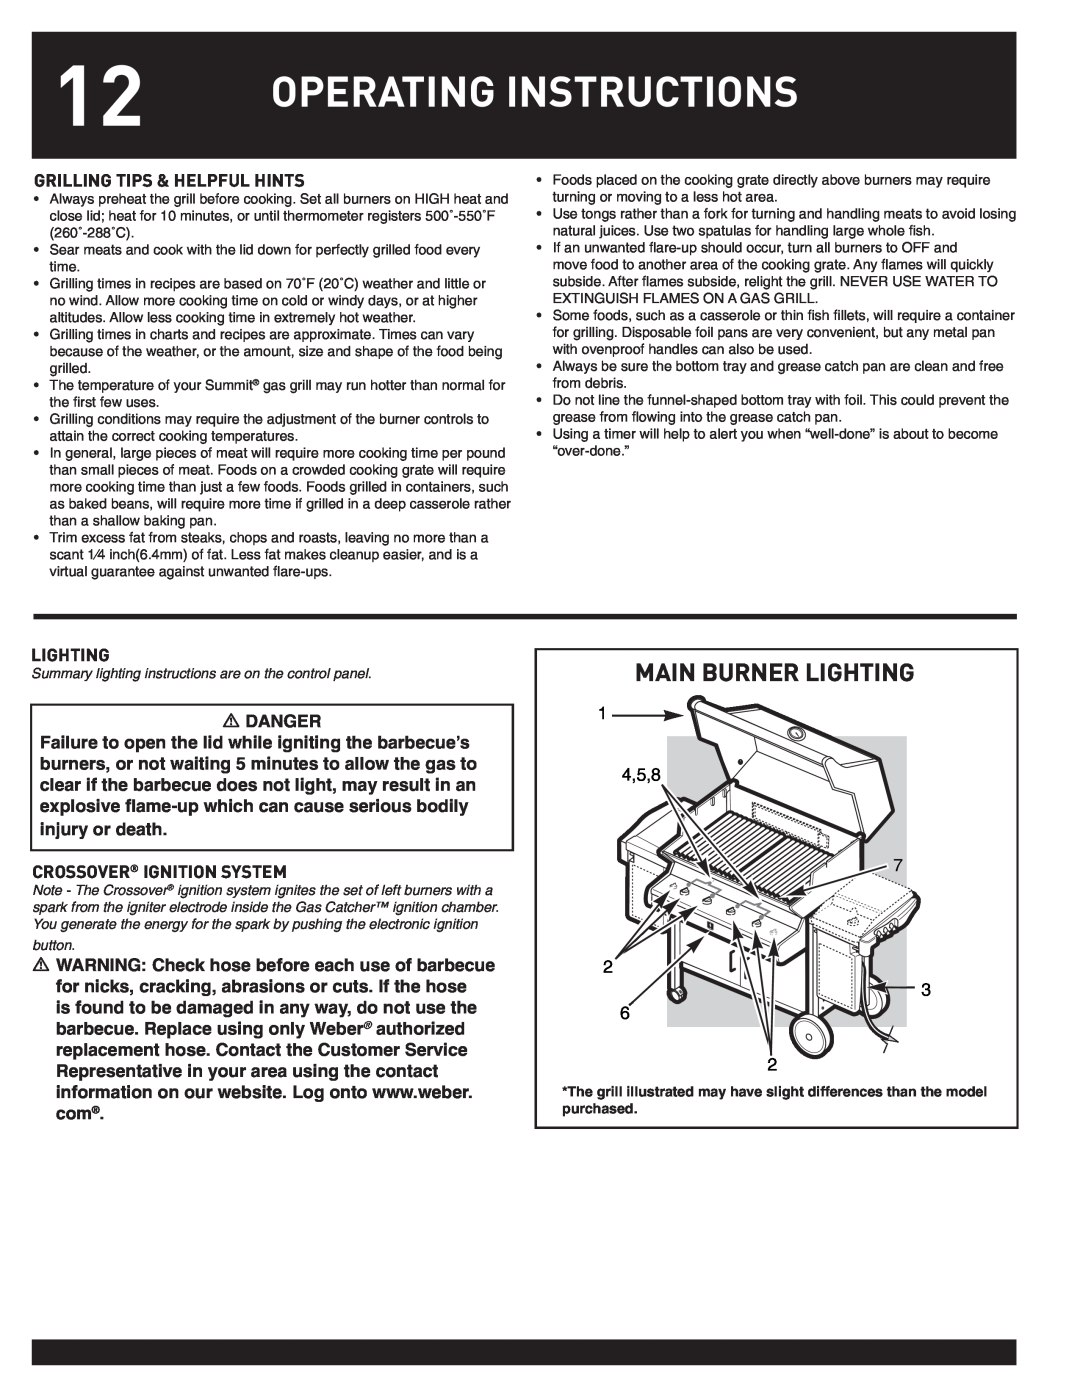 Weber 38044 manual Main Burner Lighting, Operating Instructions, Grilling Tips & Helpful Hints, Crossover Ignition System 